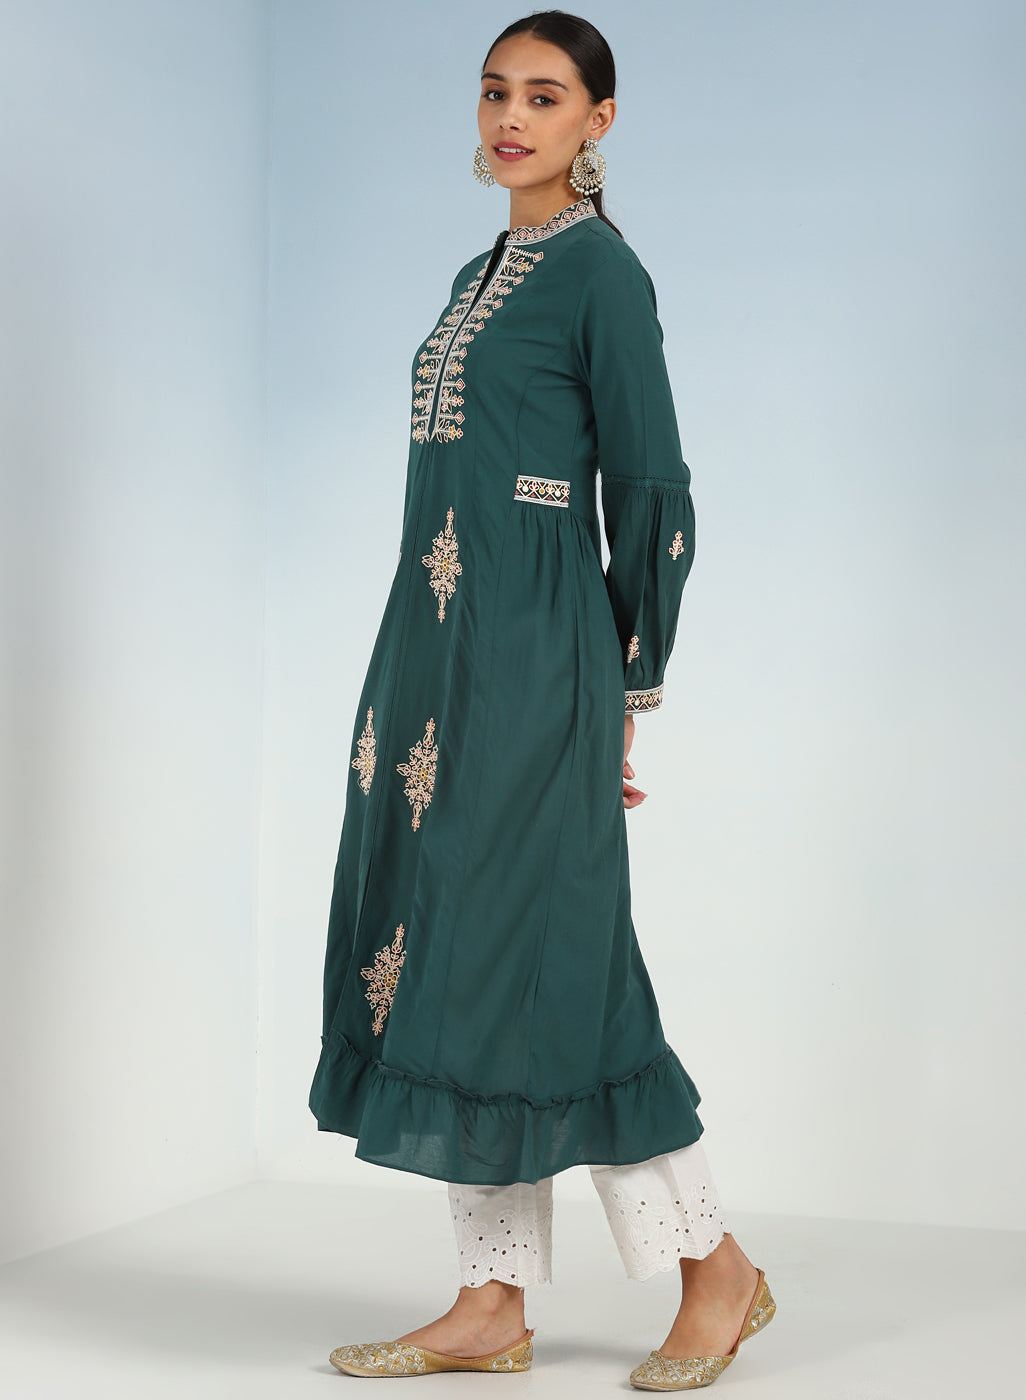 Green Long Geometrical Embroidered Dress with Frilled Hem